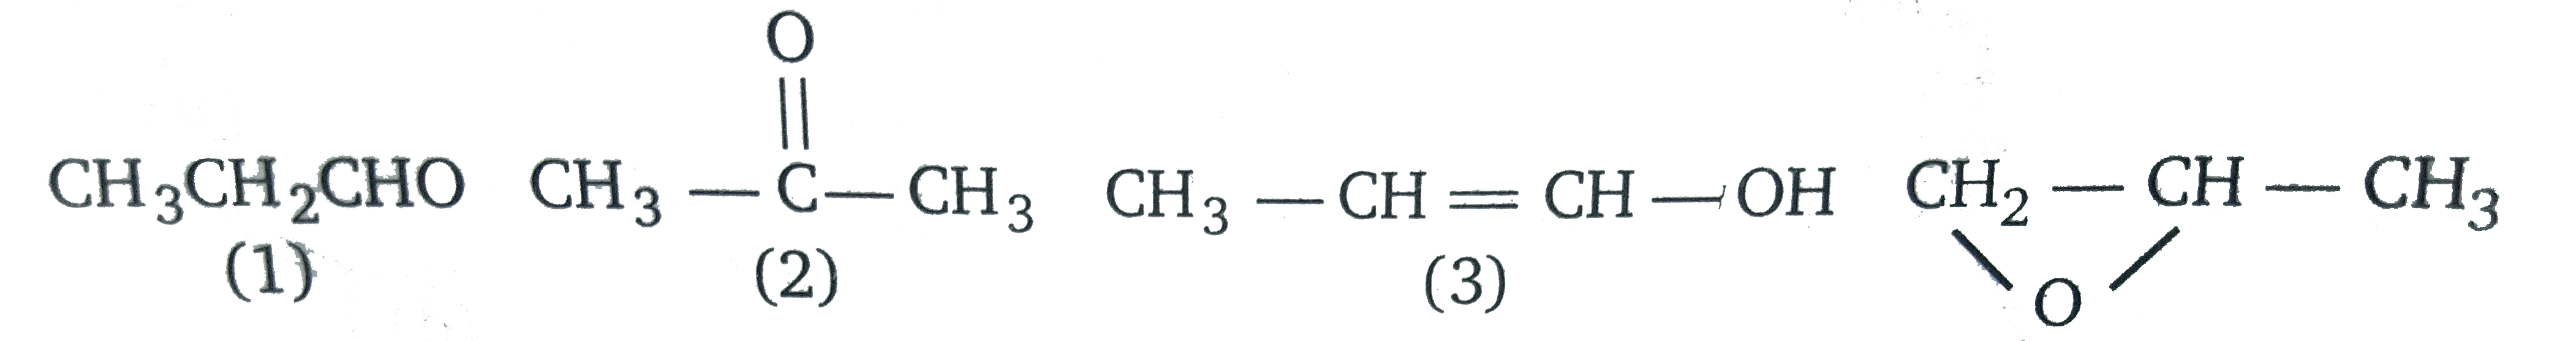 Which of the following is an isomer of compound 1 ?